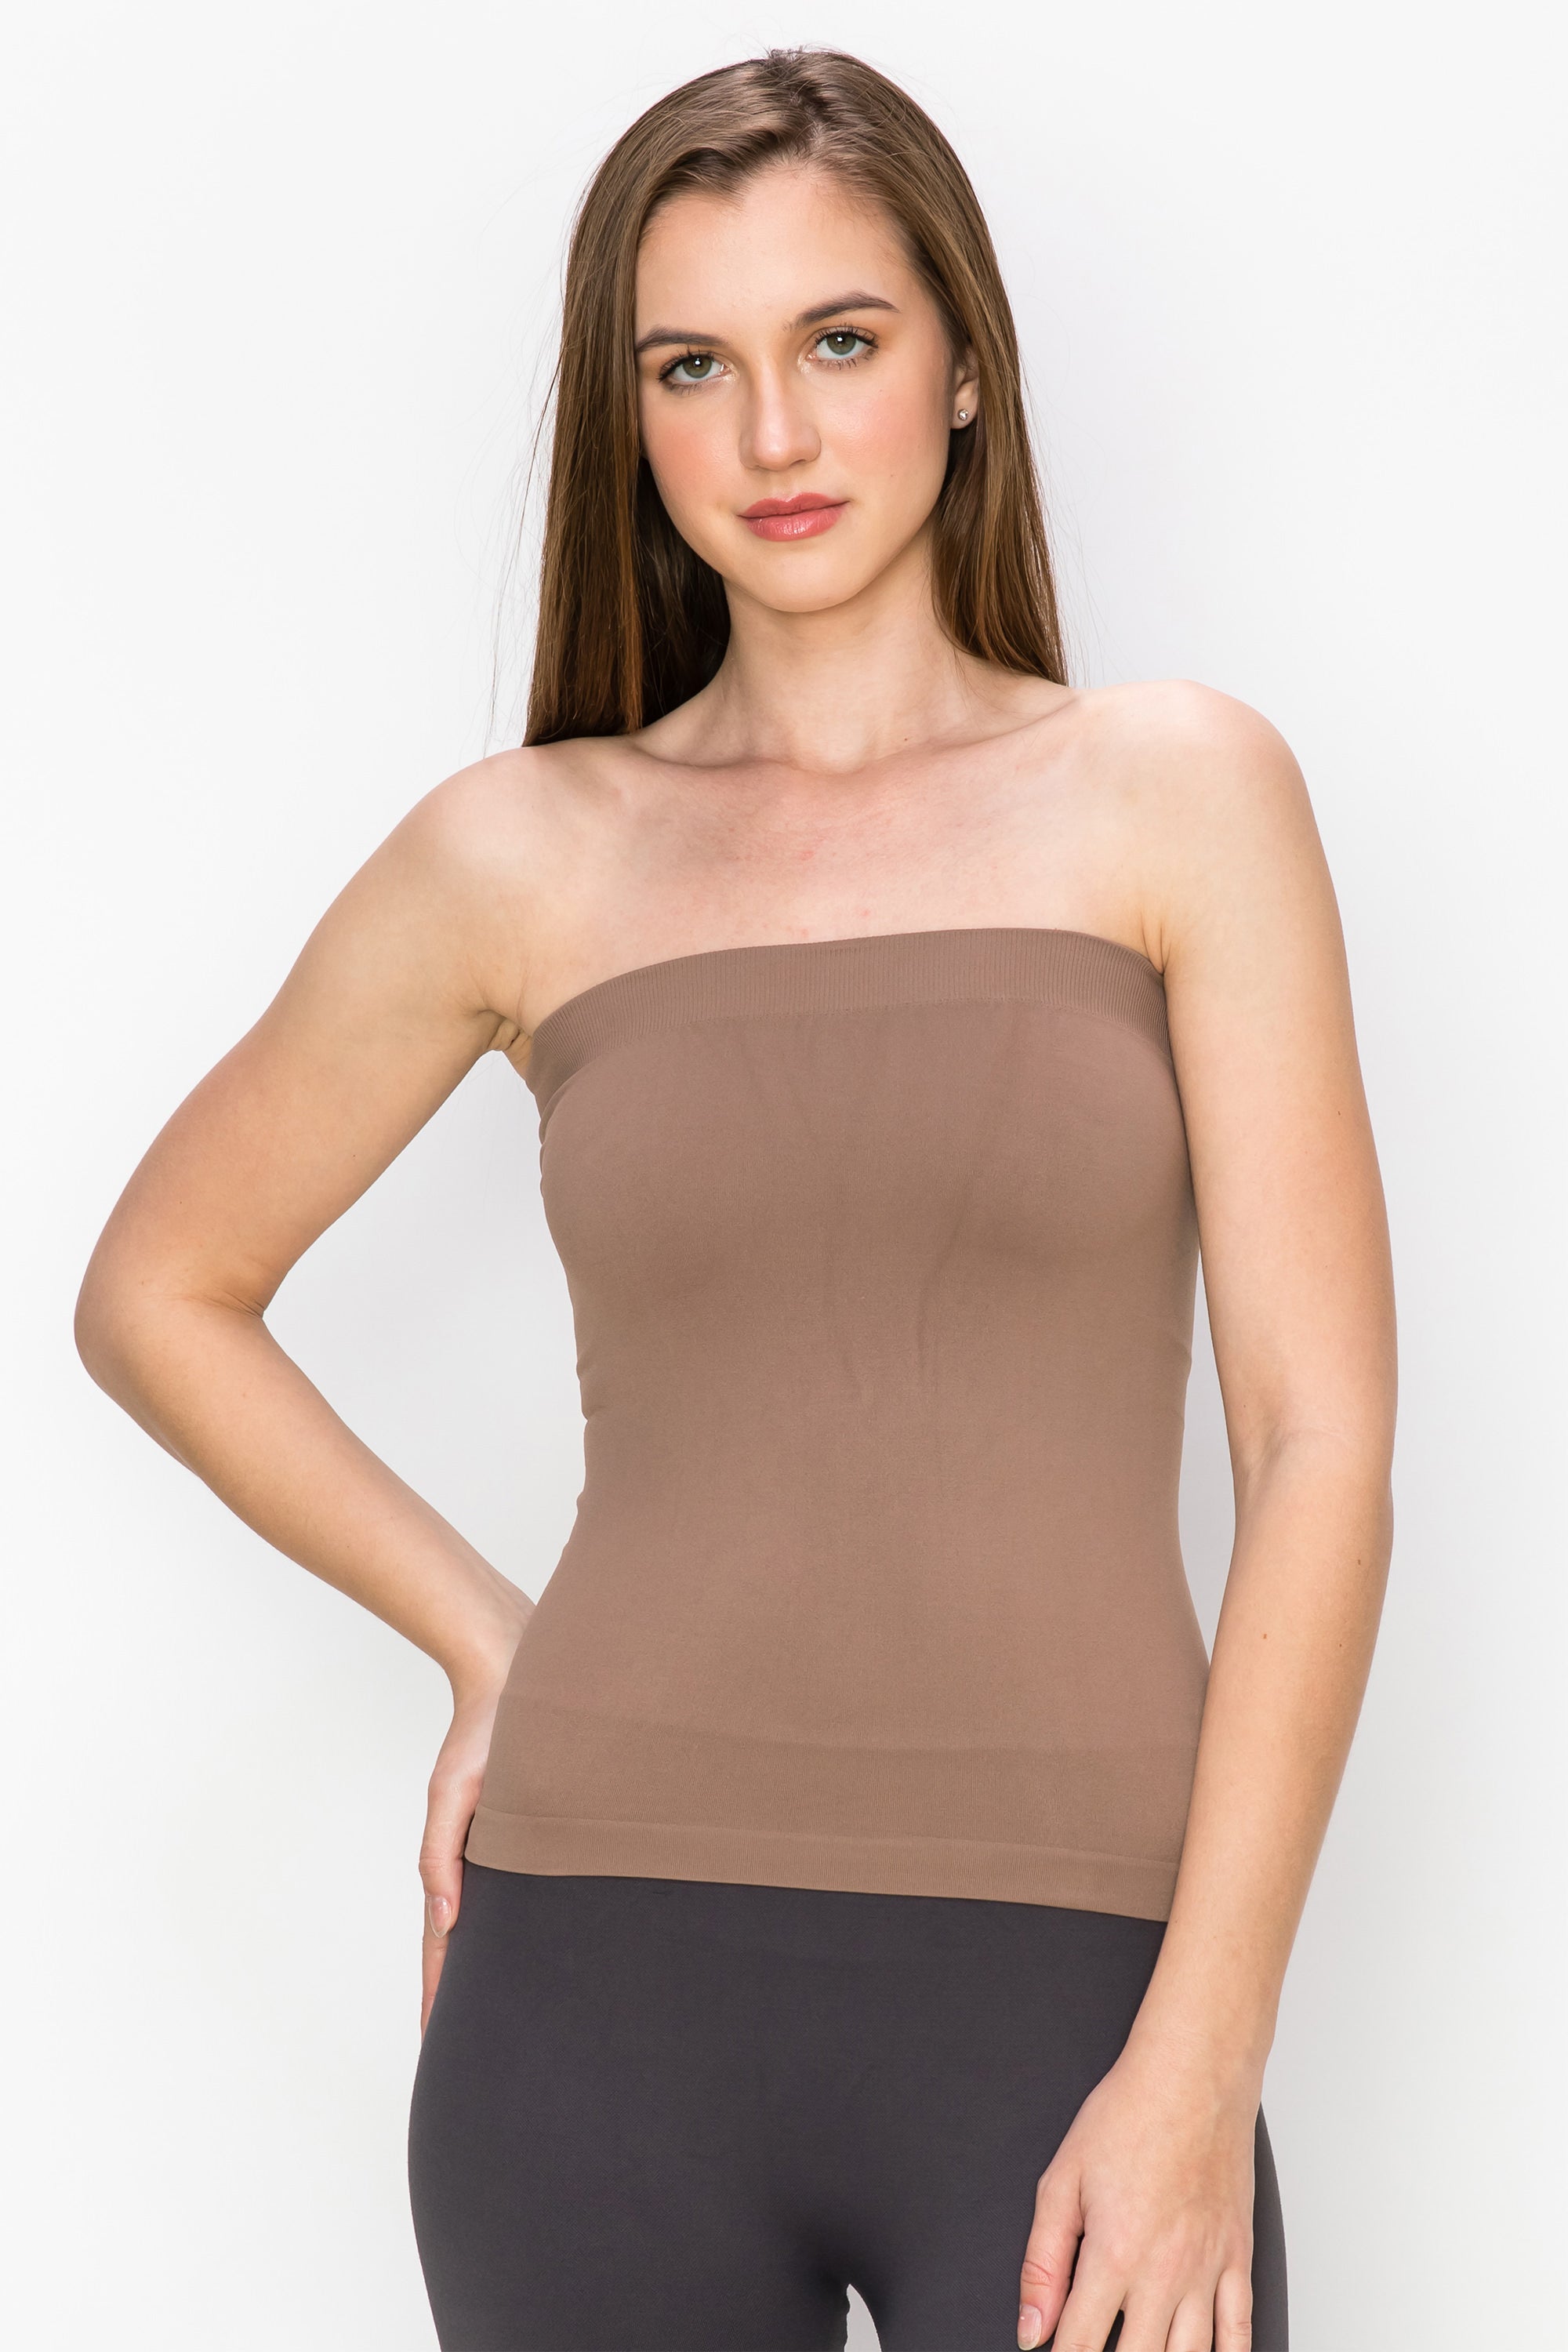 strapless tops with built in bra  Metyou Women's Strapless Tube Tops with  Built-in Shelf Bra,Stretch Seamless Layer Blouse Shirt